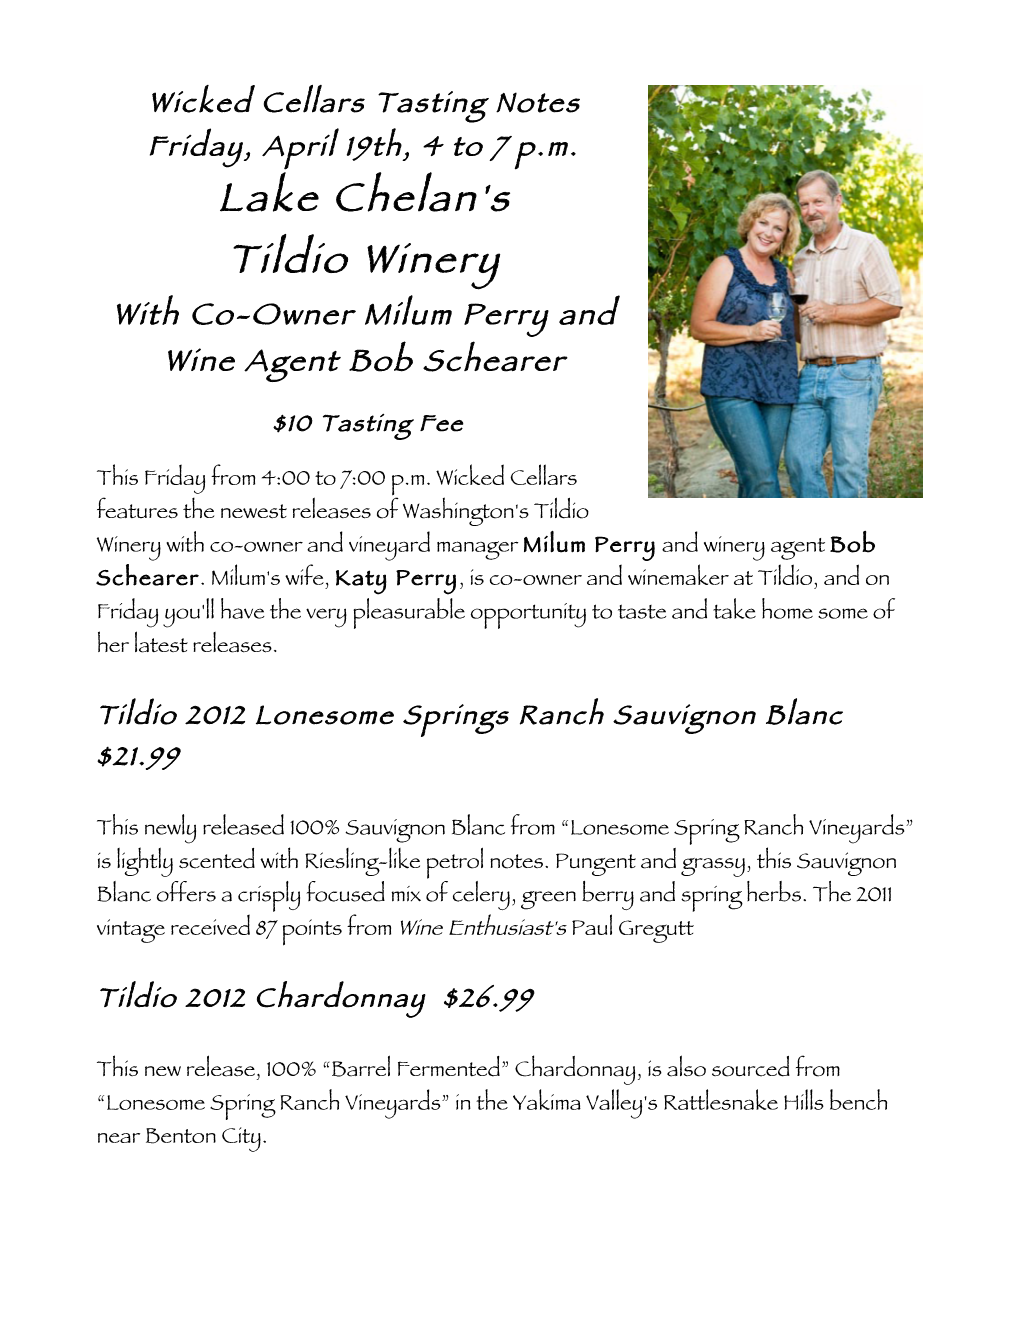 Lake Chelan's Tildio Winery with Co-Owner Milum Perry and Wine Agent Bob Schearer